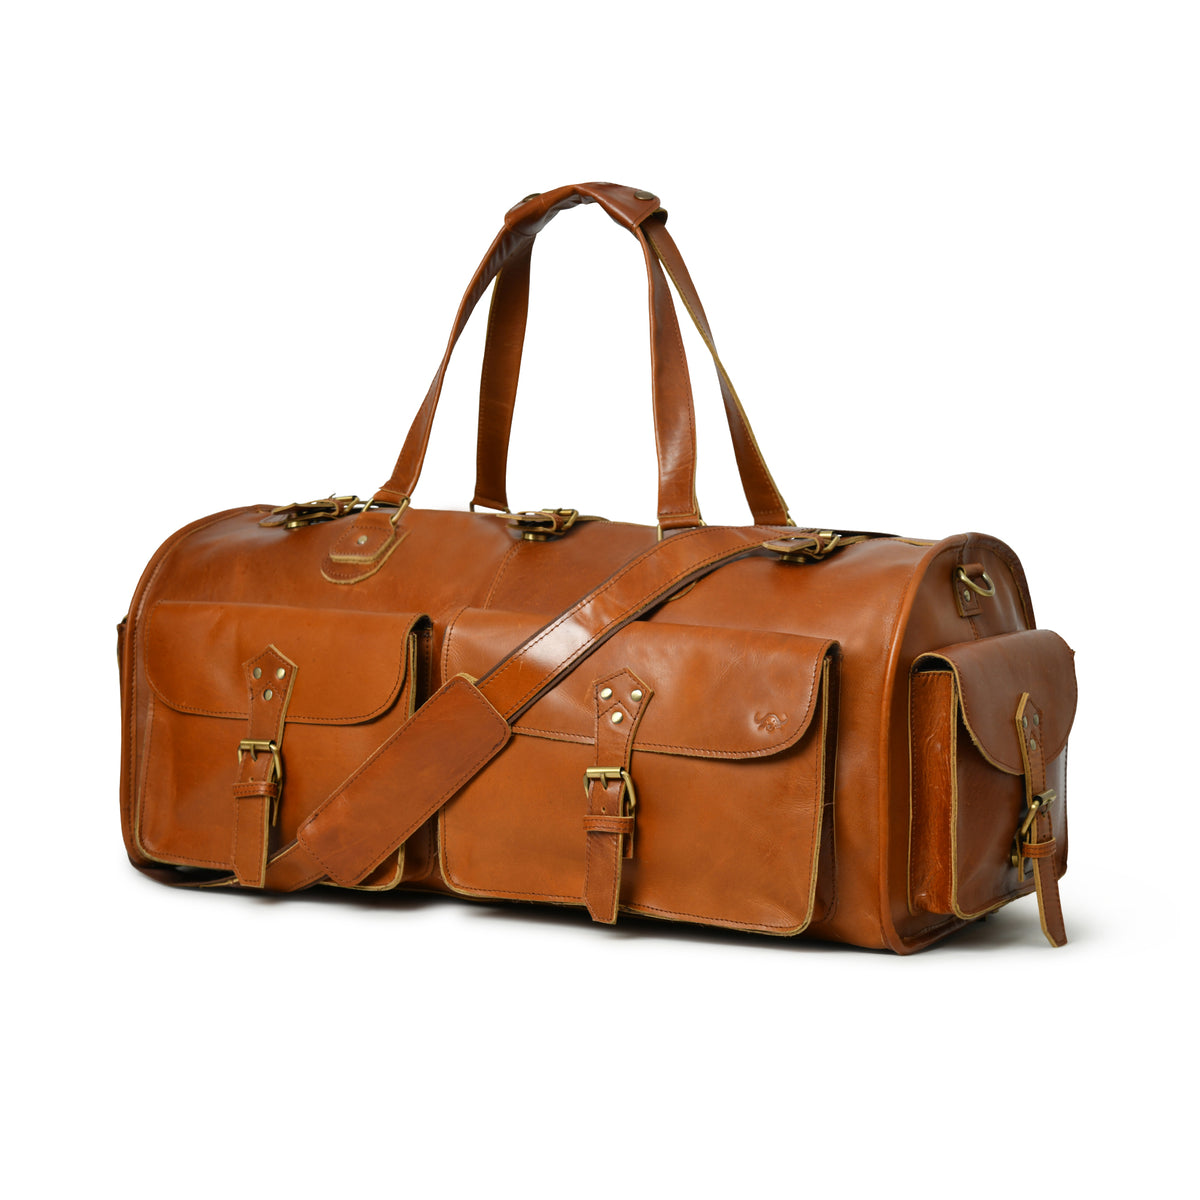 Buy Cool Buffalo Leather Travel Duffle Bag Online in USA at Lowest ...